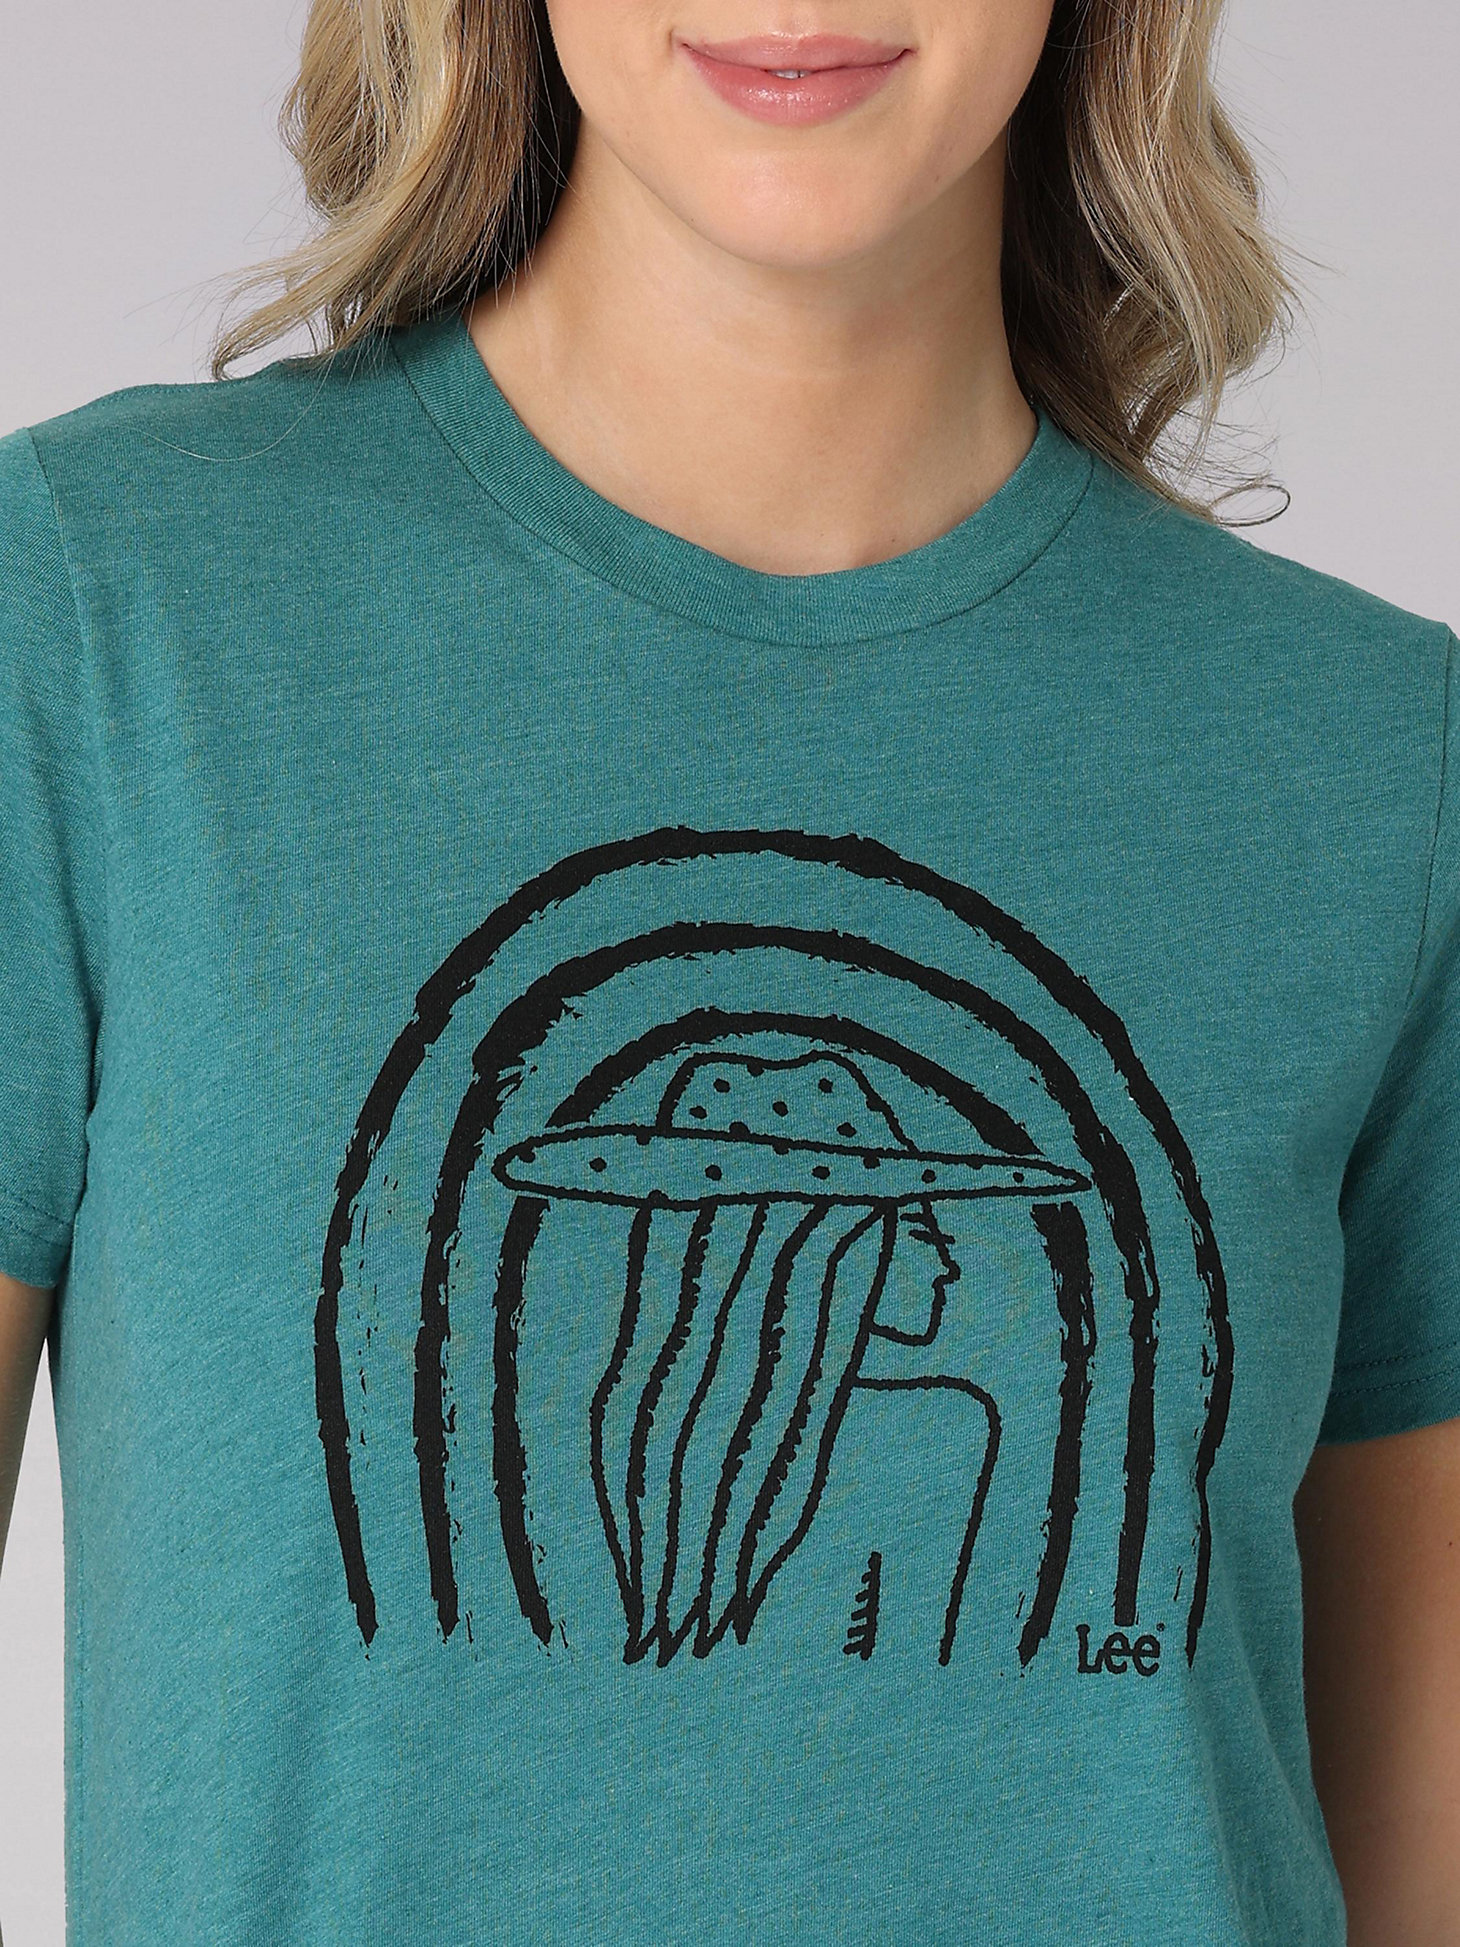 Women's Lee Lady Graphic Tee in Midway Teal Heather alternative view 2